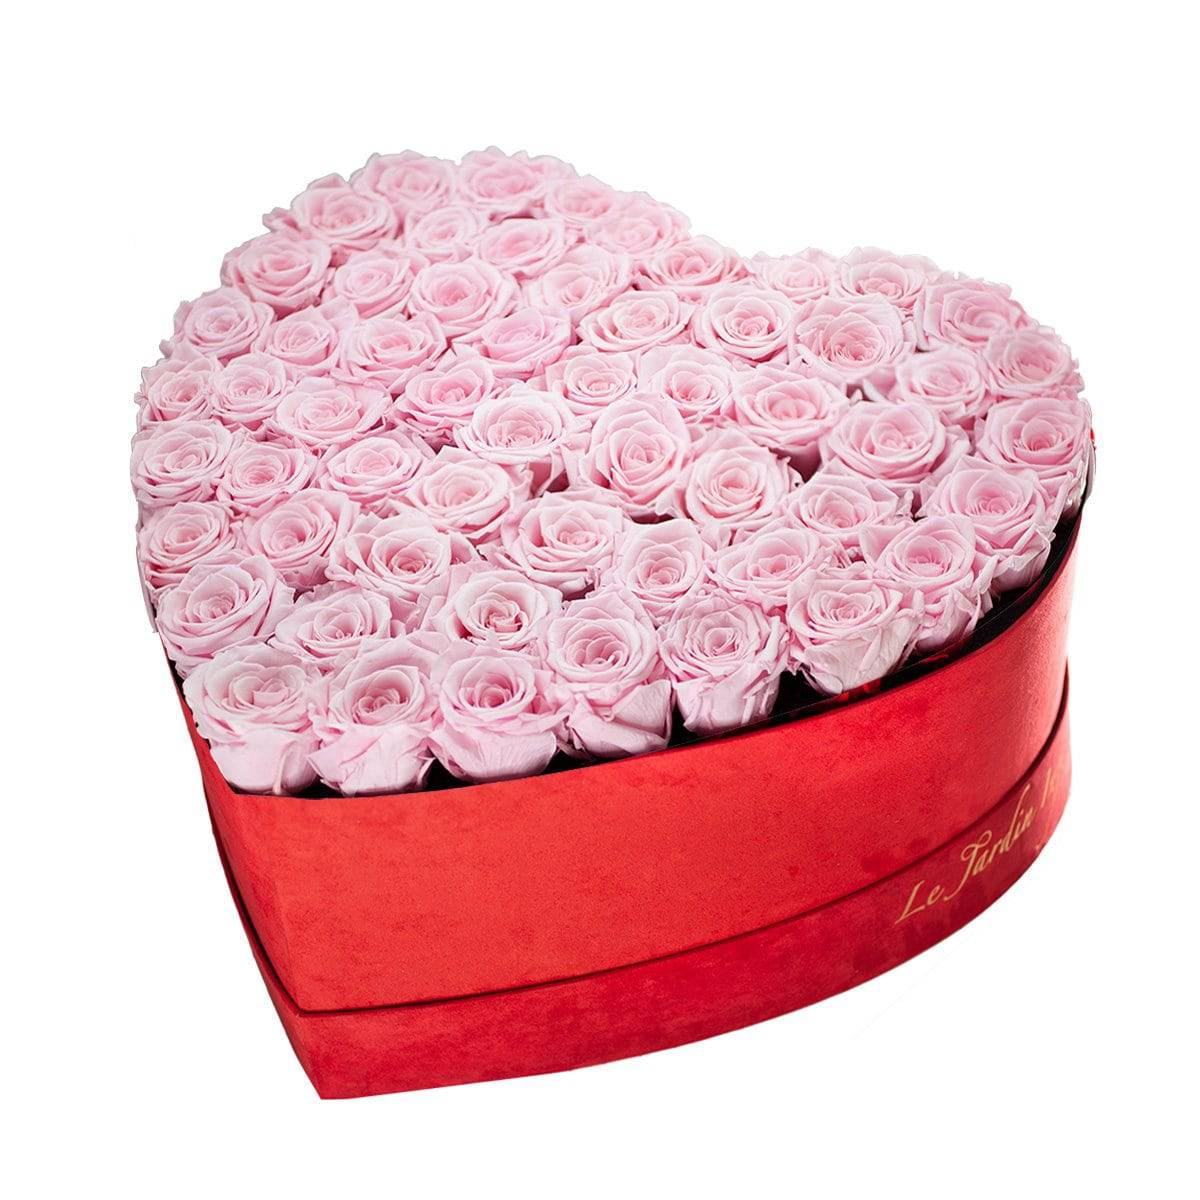 55-65 Soft Pink Preserved Roses in A Heart Shaped Box - Medium Heart Luxury Red Suede Box - Le Jardin Infini Roses in a Box